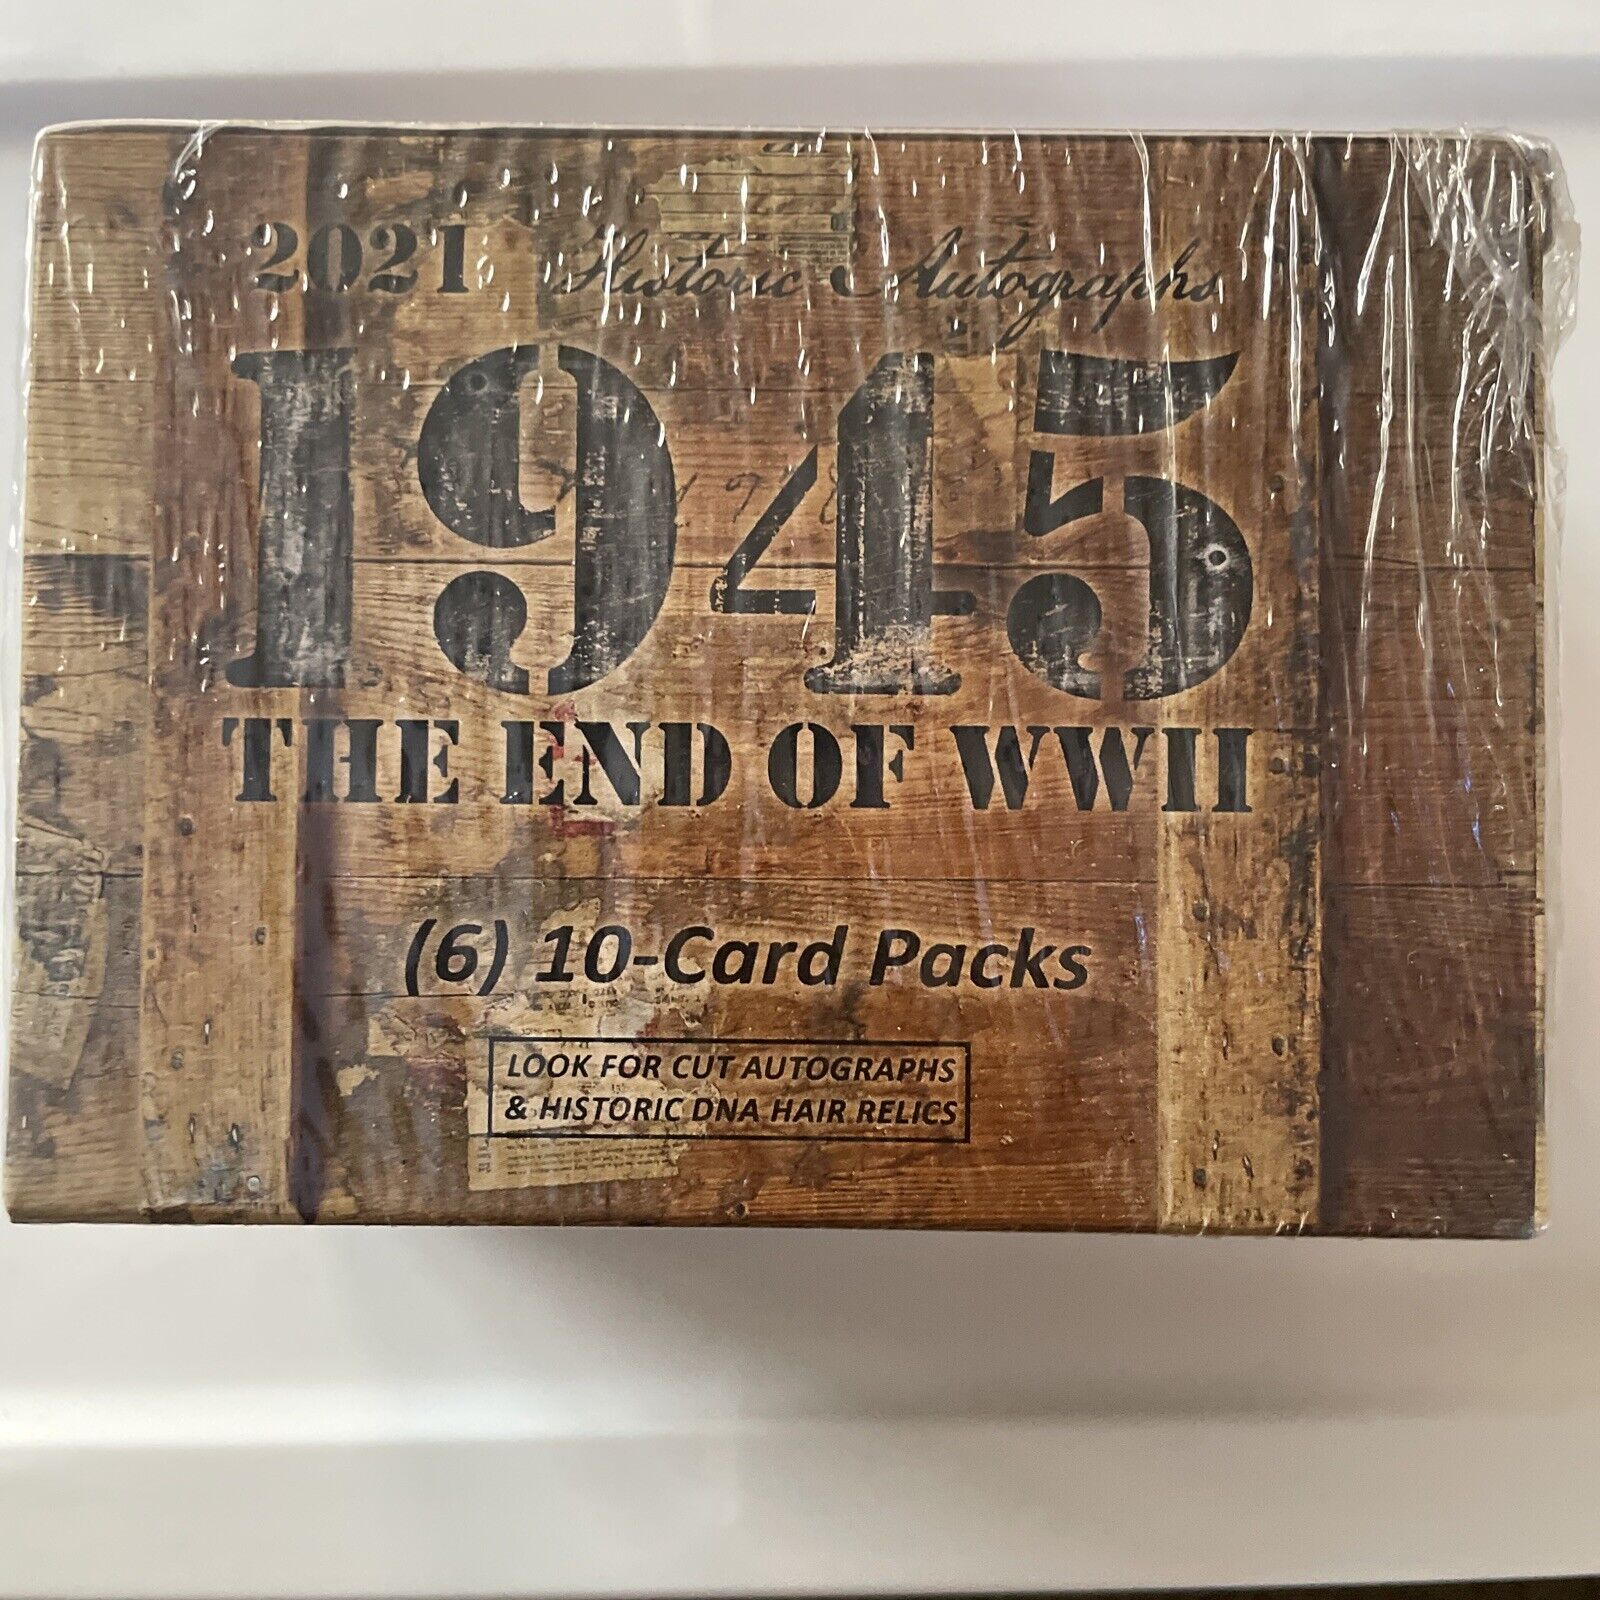 New Unopened 2021 Historic Autographs 1945: End of the War Blaster Box